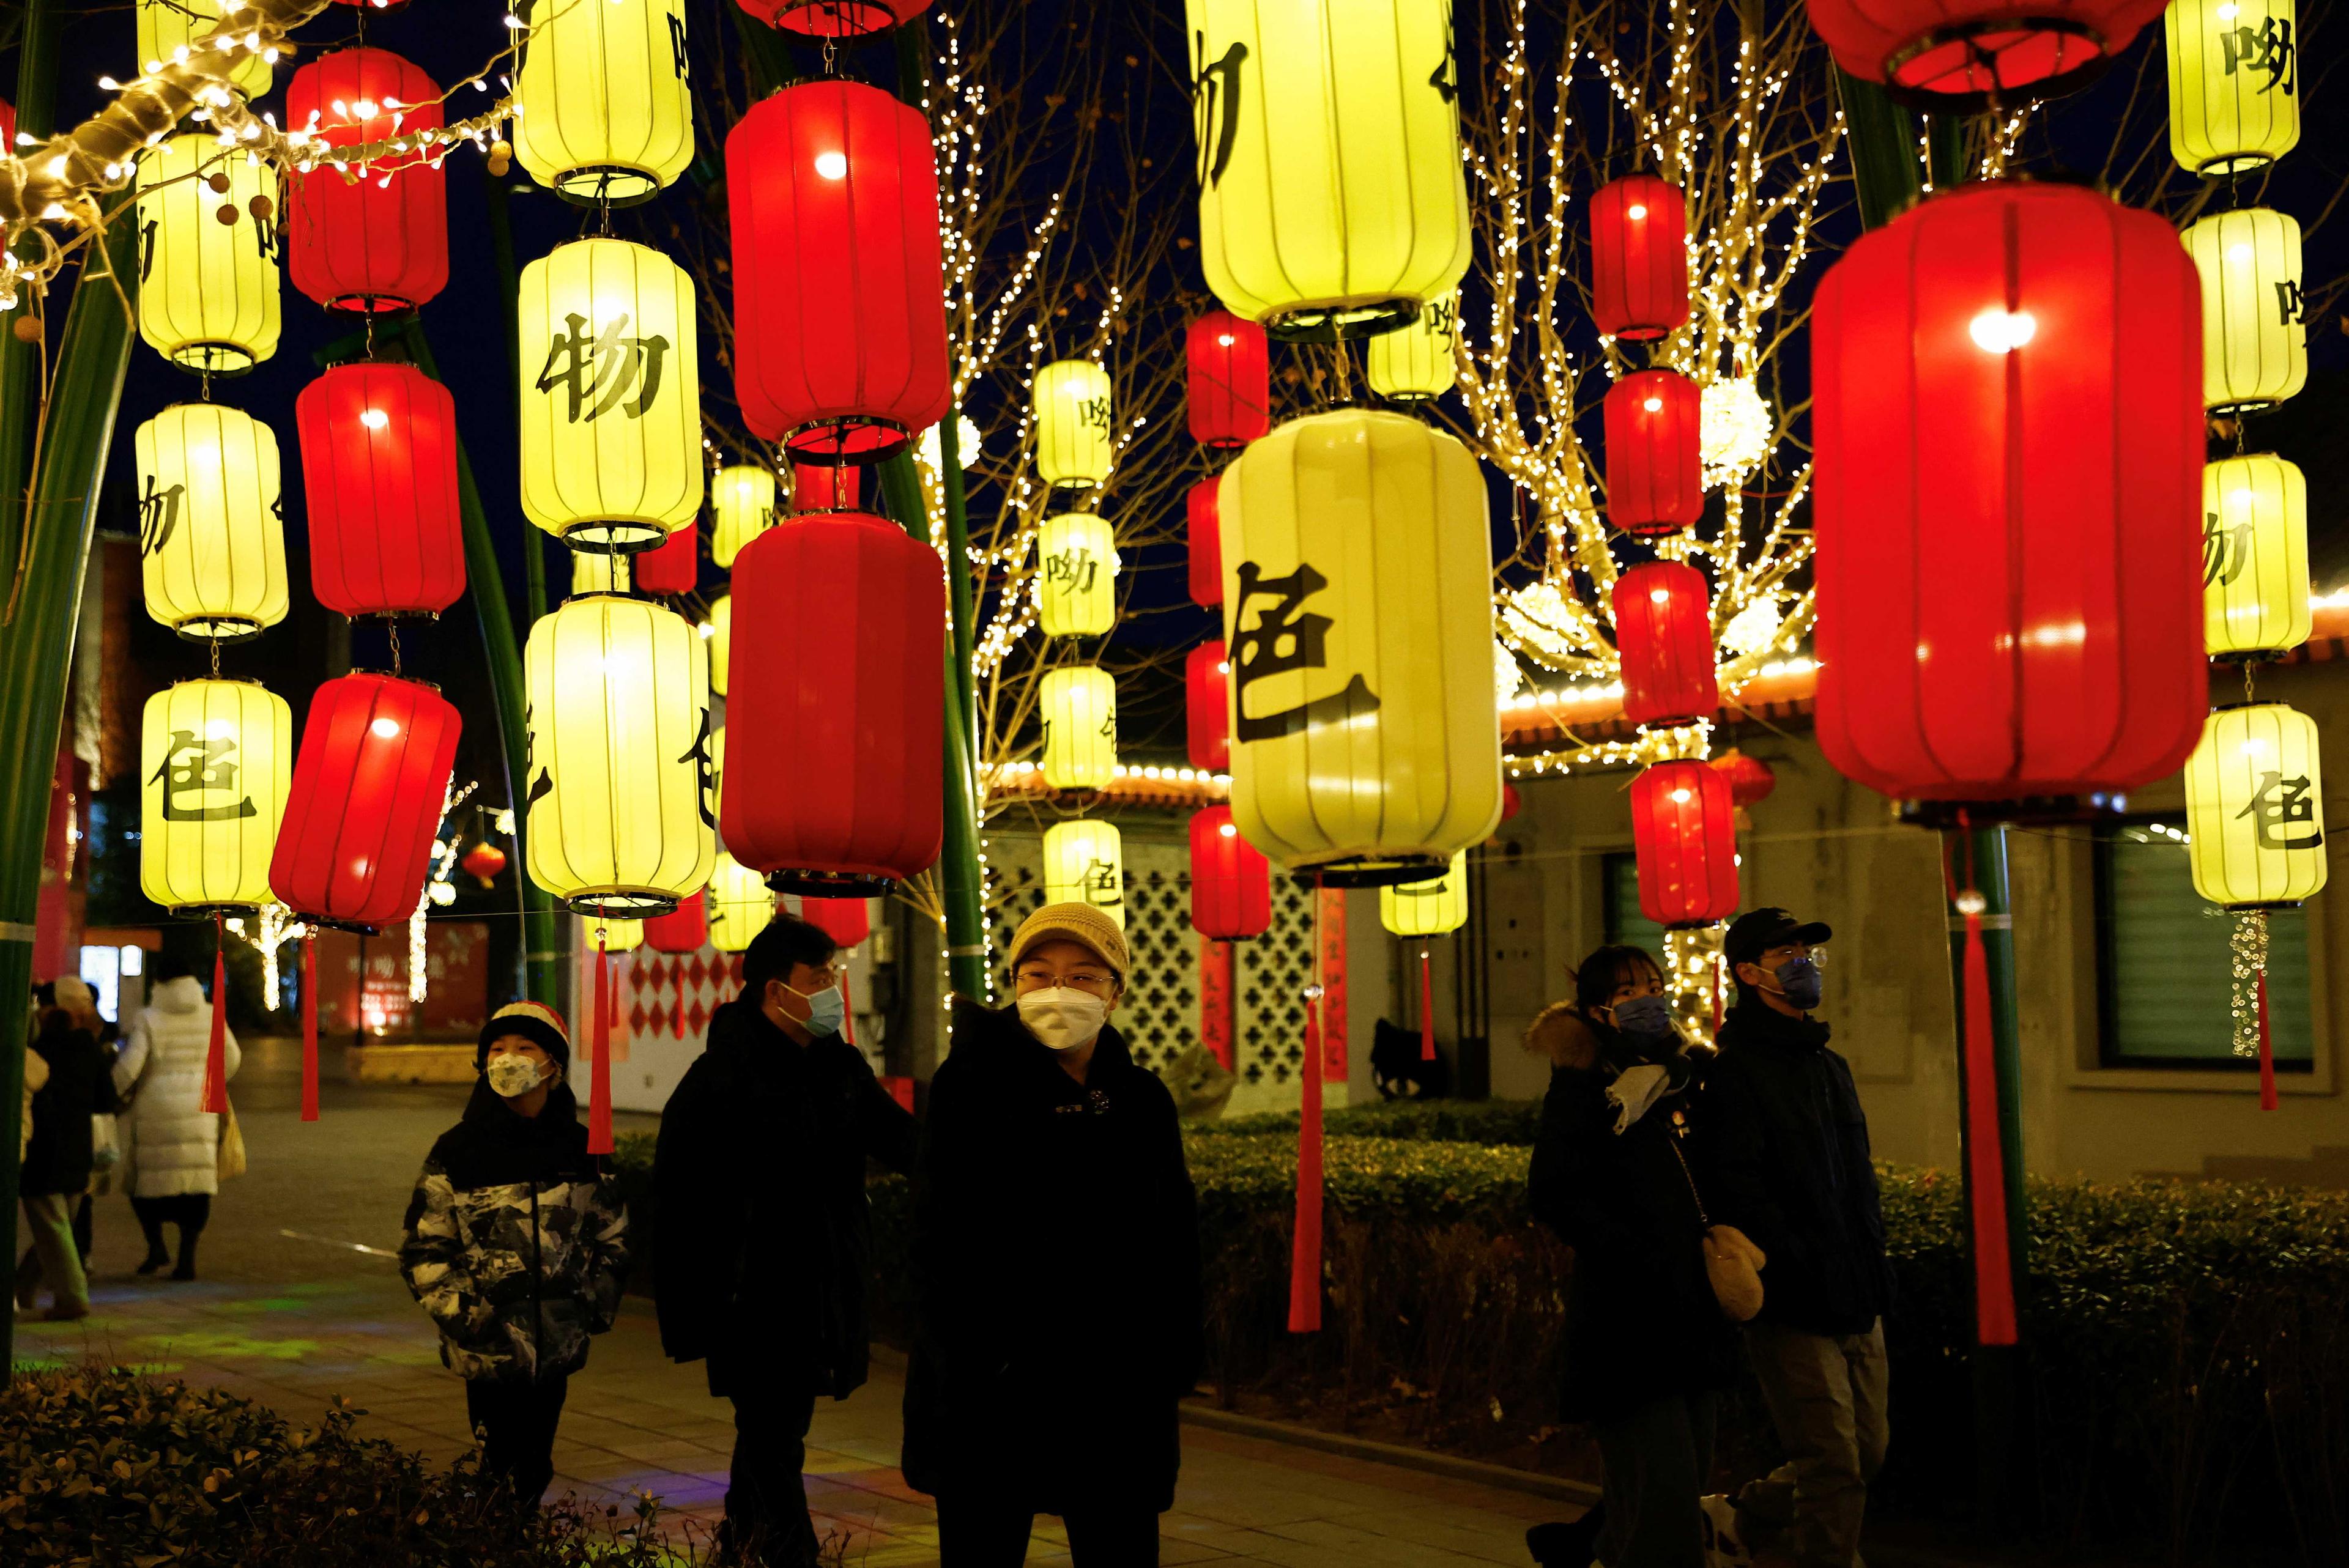 People walk past lanterns decorating a Chinese Lunar New Year festive market in Beijing, China Jan 14. Photo: Reuters